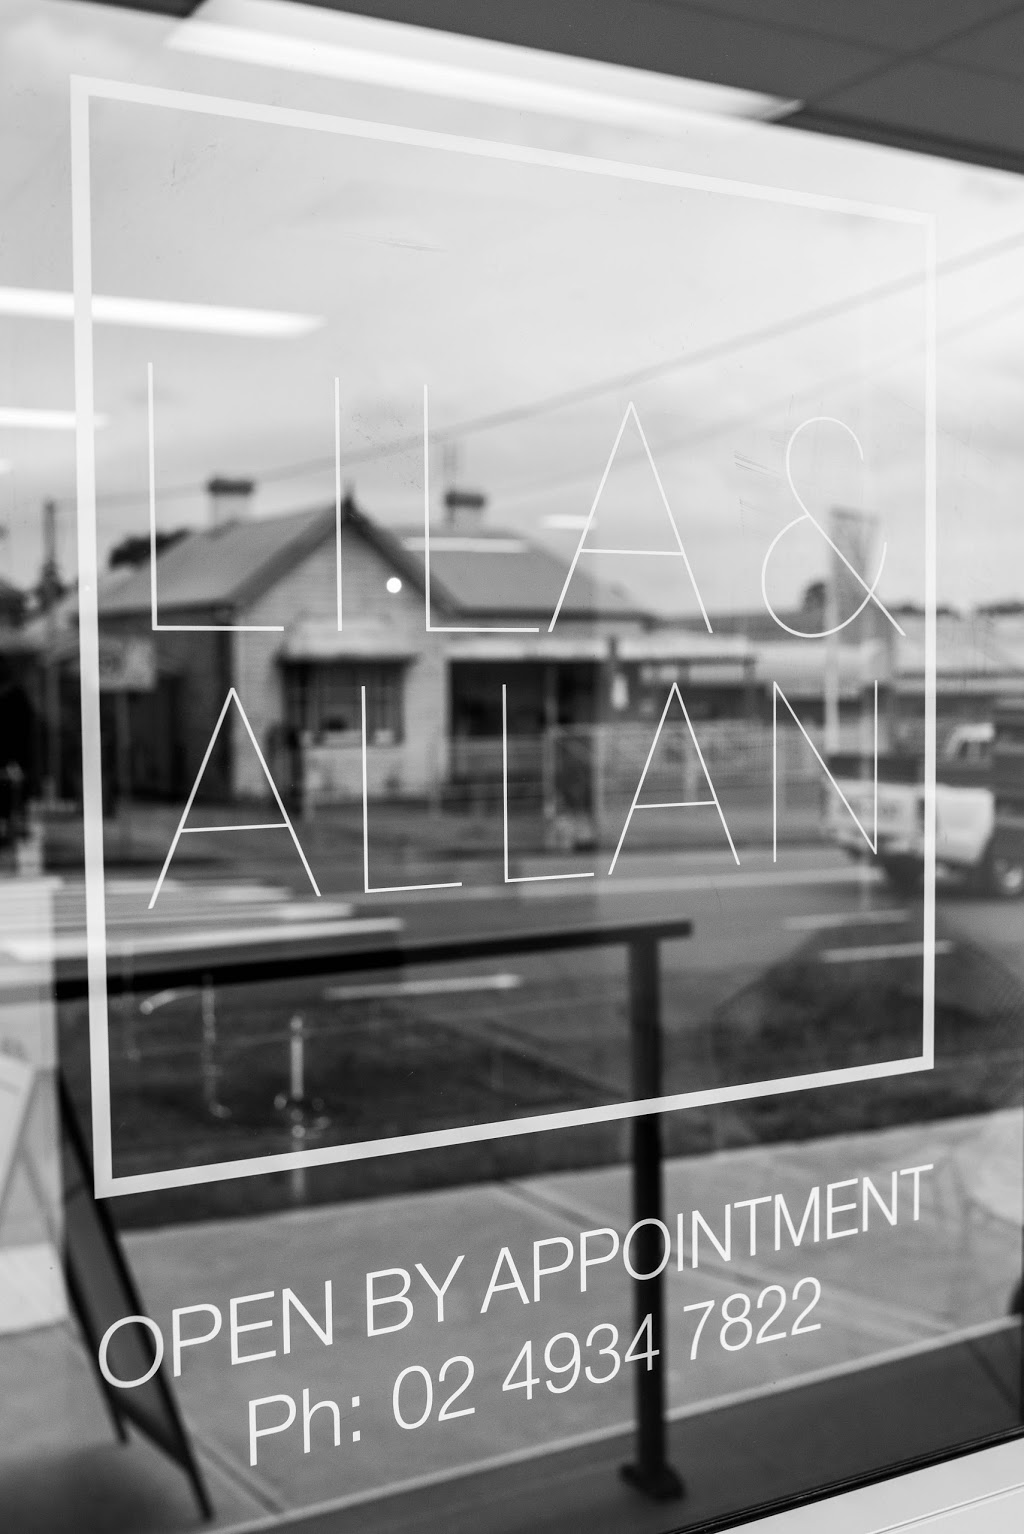 LILA AND ALLAN | hair care | 1/133 Lawes St, East Maitland NSW 2323, Australia | 0249347822 OR +61 2 4934 7822